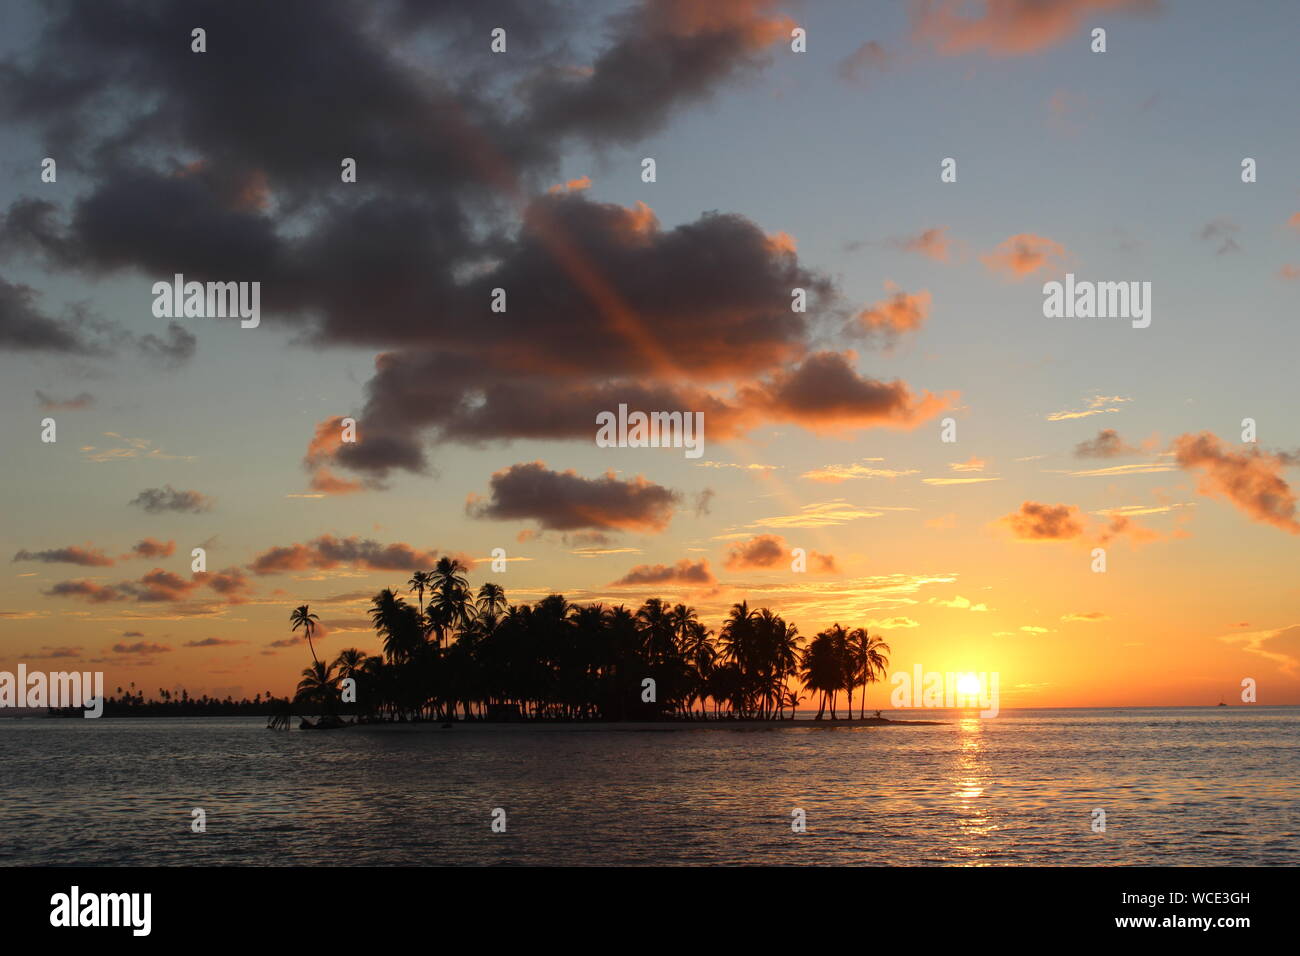 Dreamlike Island With Palm Trees At Sunset Stock Photo